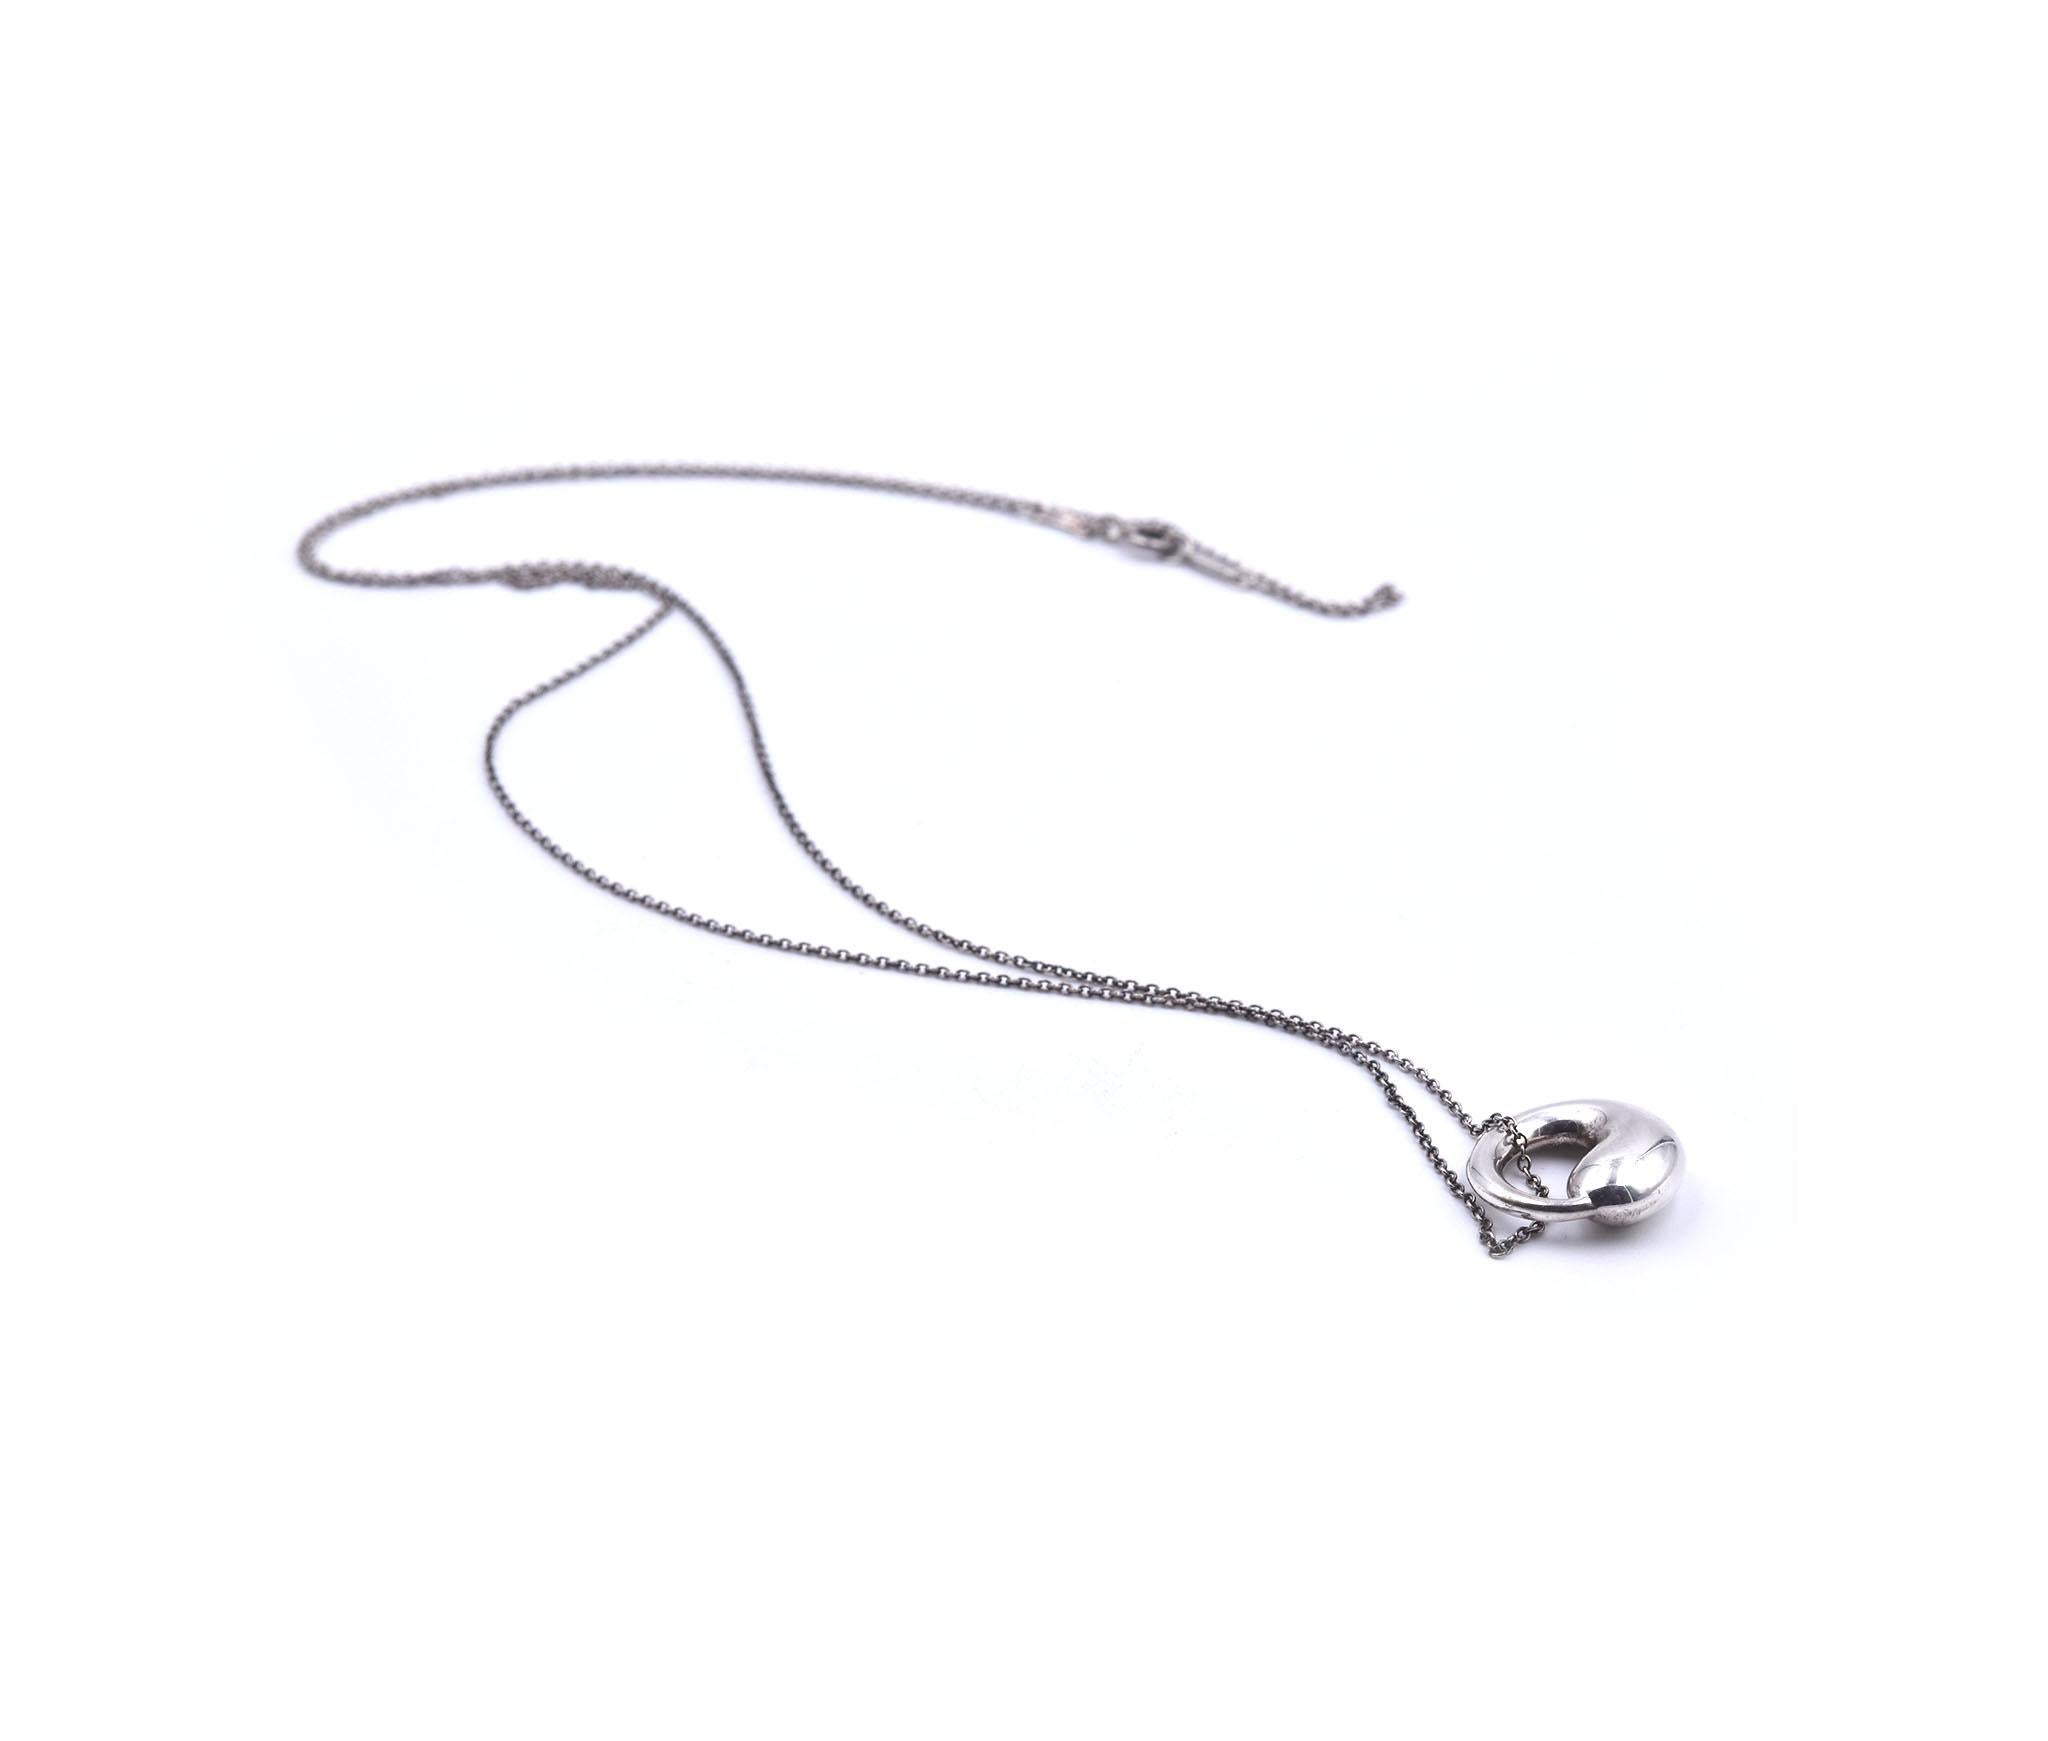 Designer: Tiffany & Co. Elsa Peretti
Material: sterling silver 
Dimensions: necklace is 28-inches long, pendant is 16.55mm by 17.02mm
Weight:  8.07 grams
